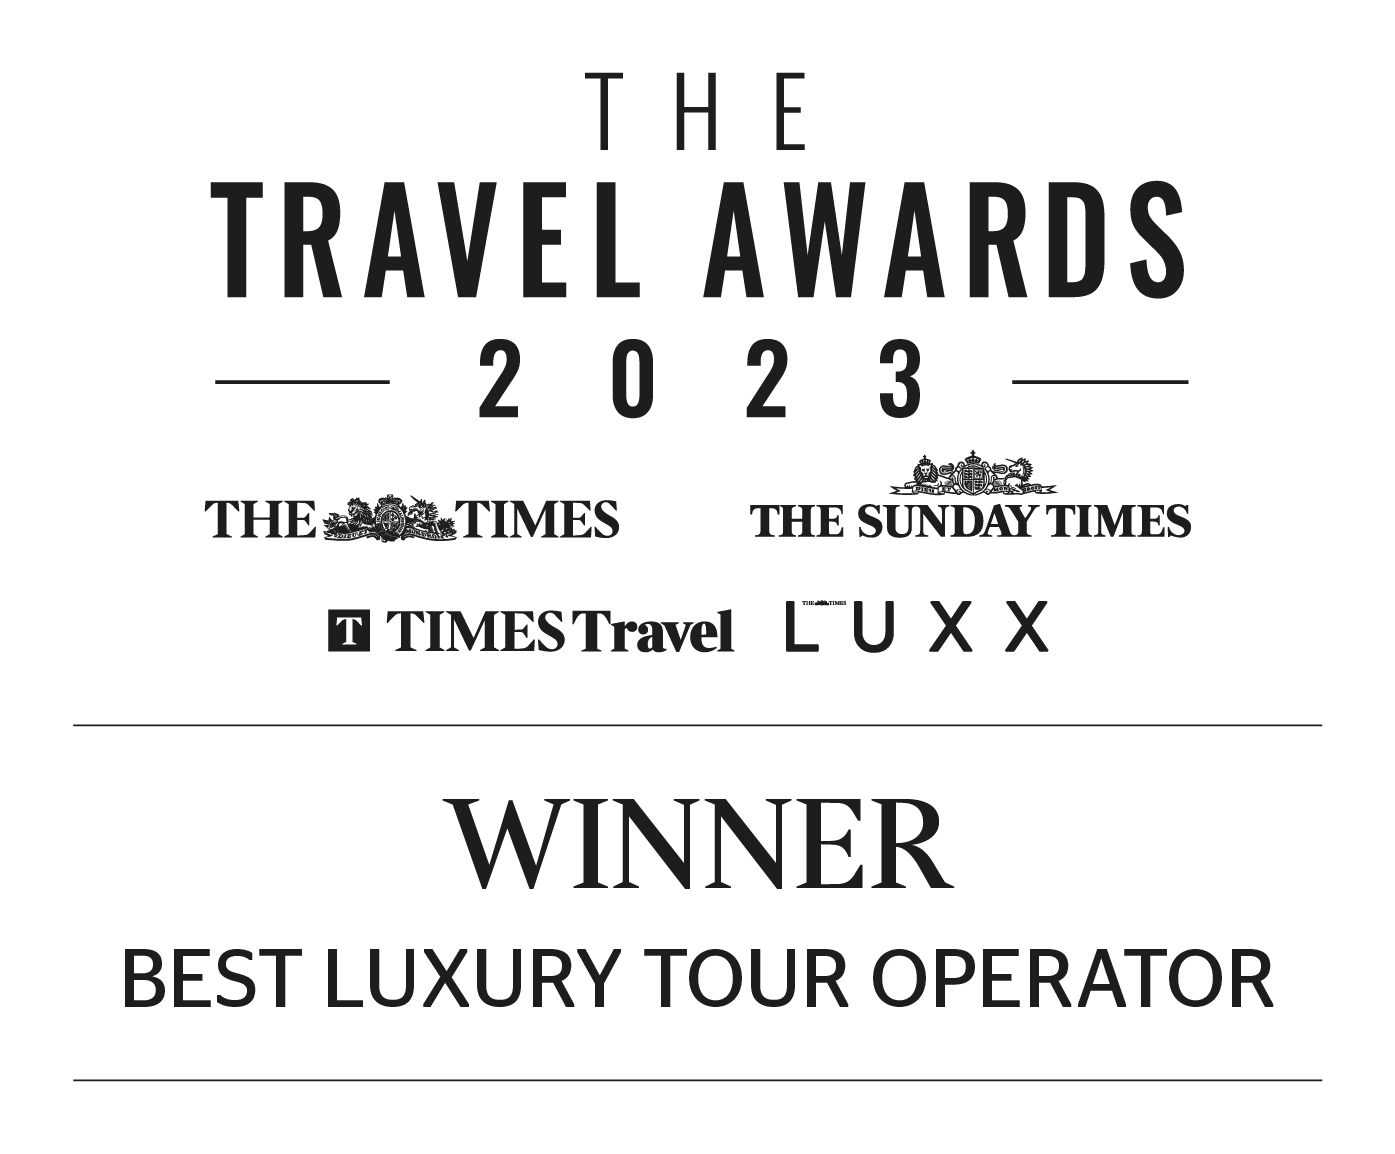 Times Travel Awards 2023